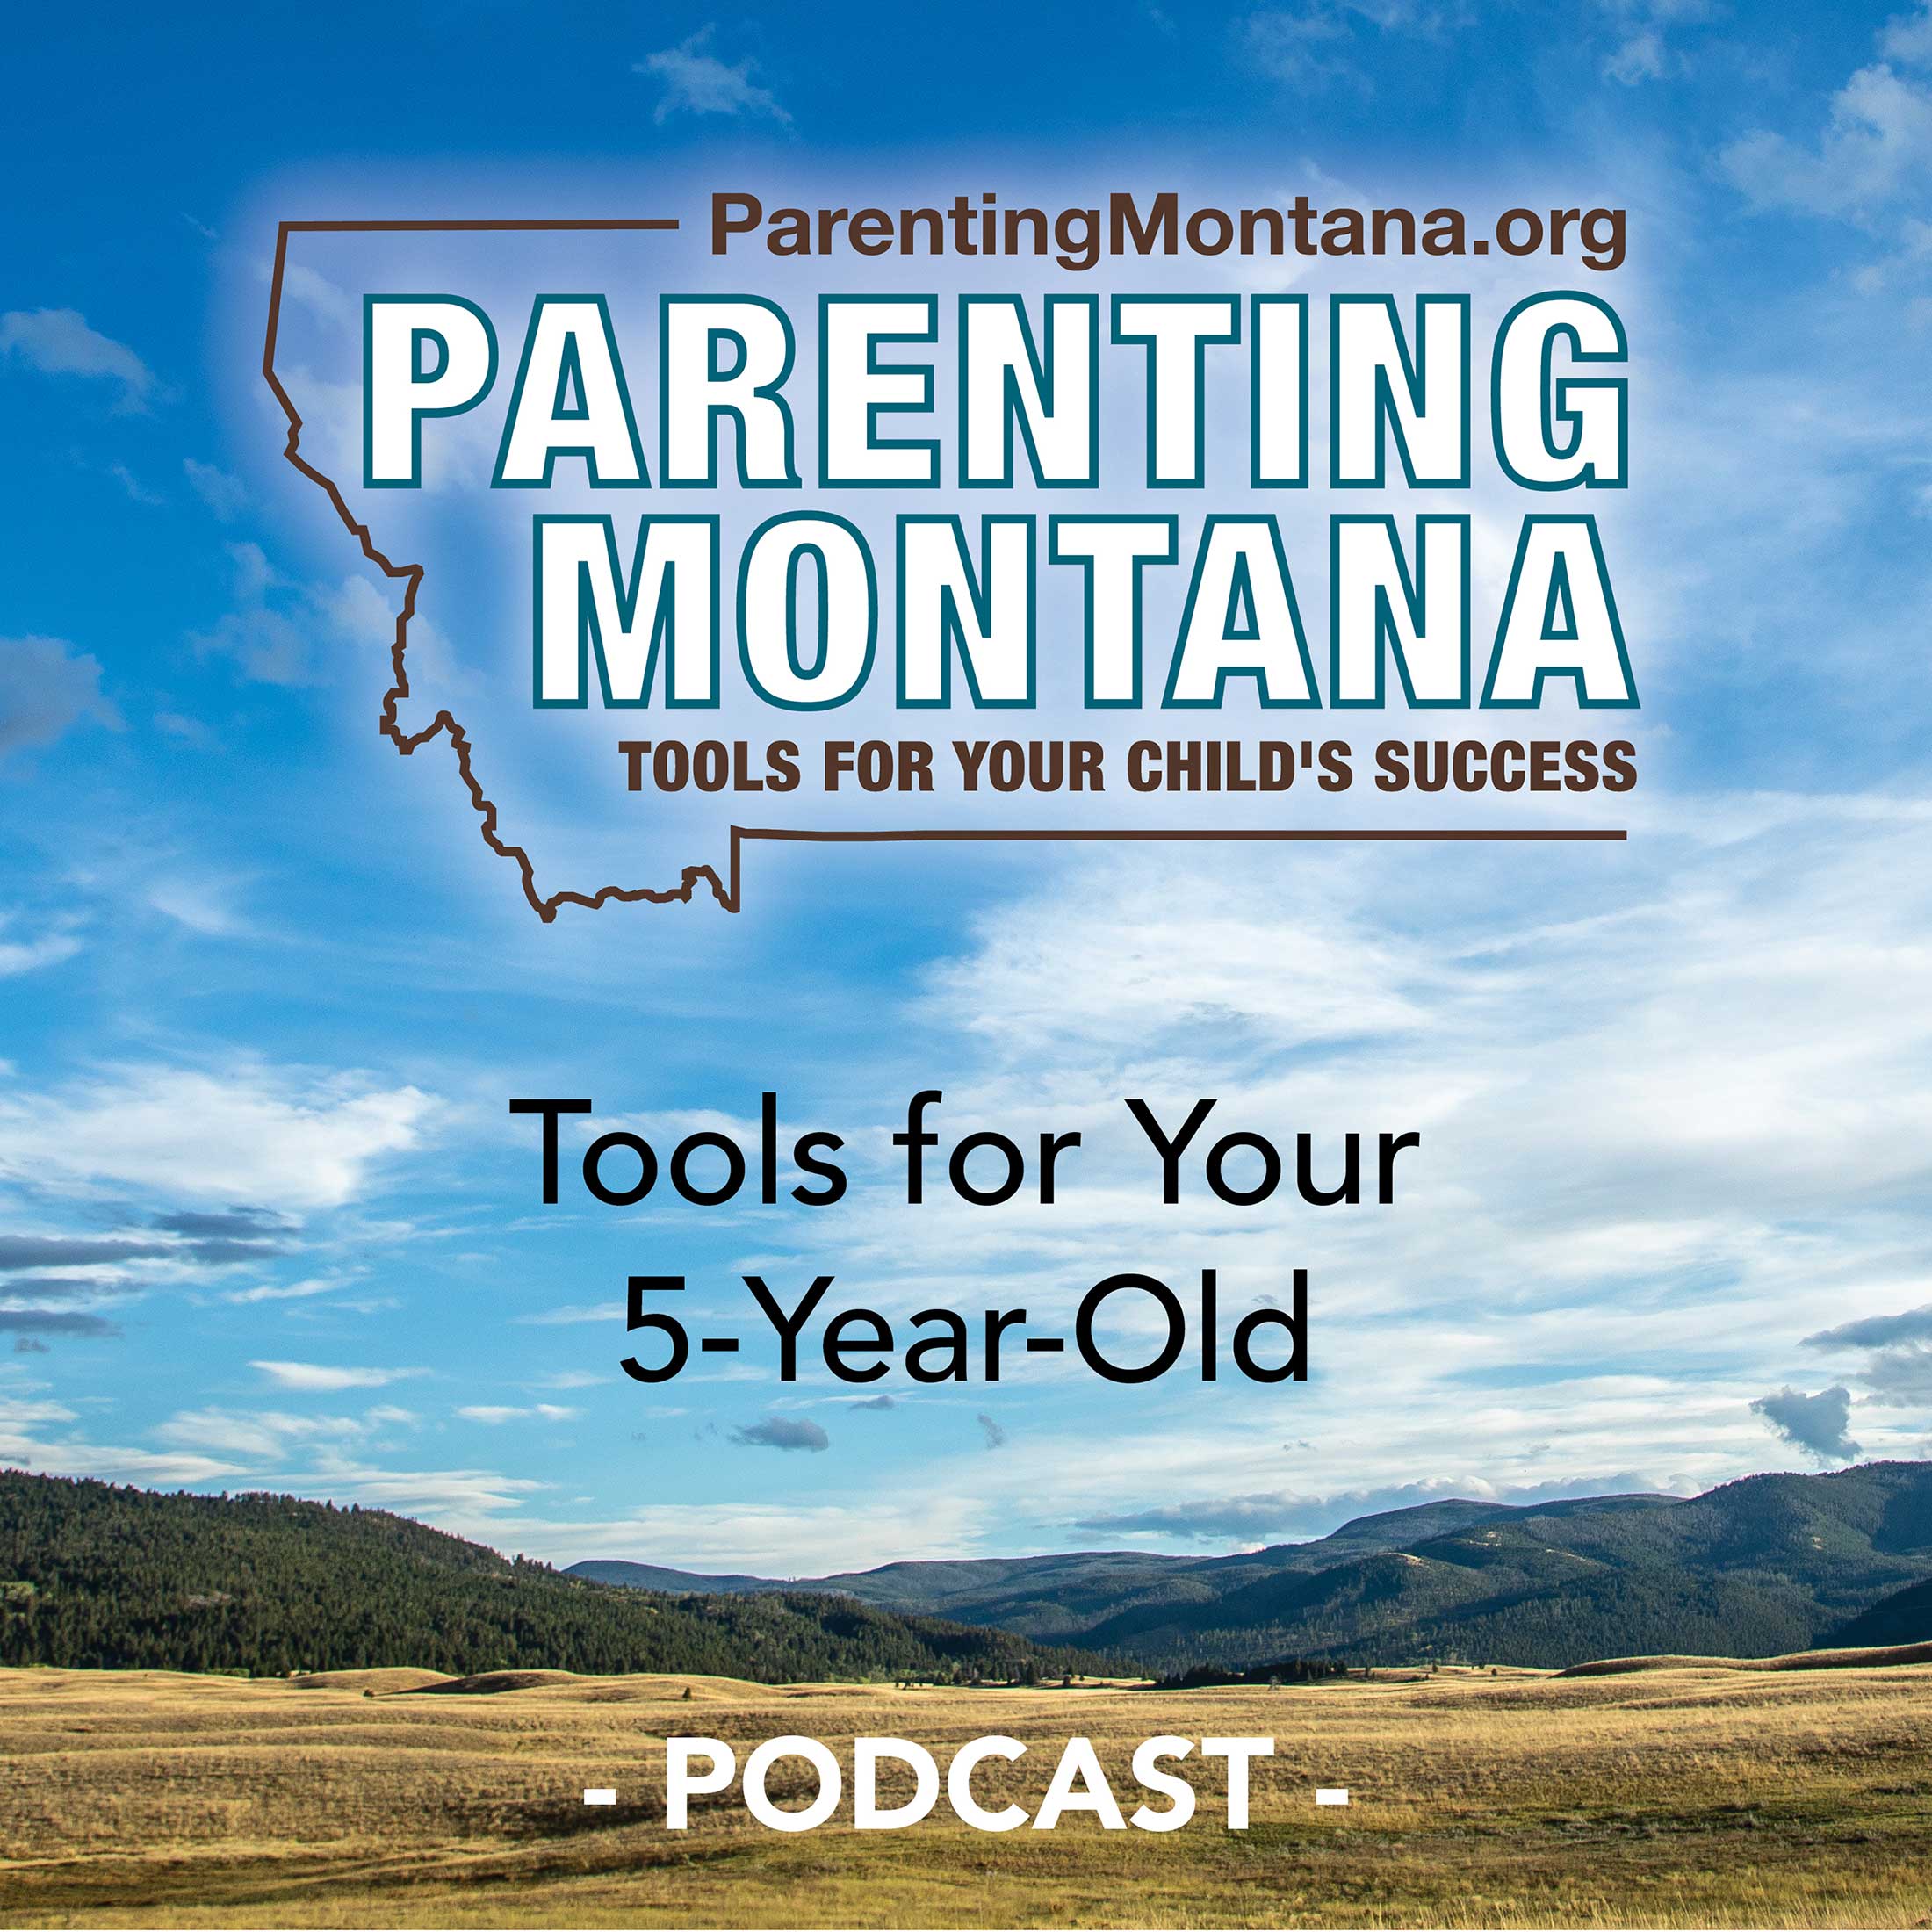 Artwork for podcast 5-Year-Old Parenting Montana Tools